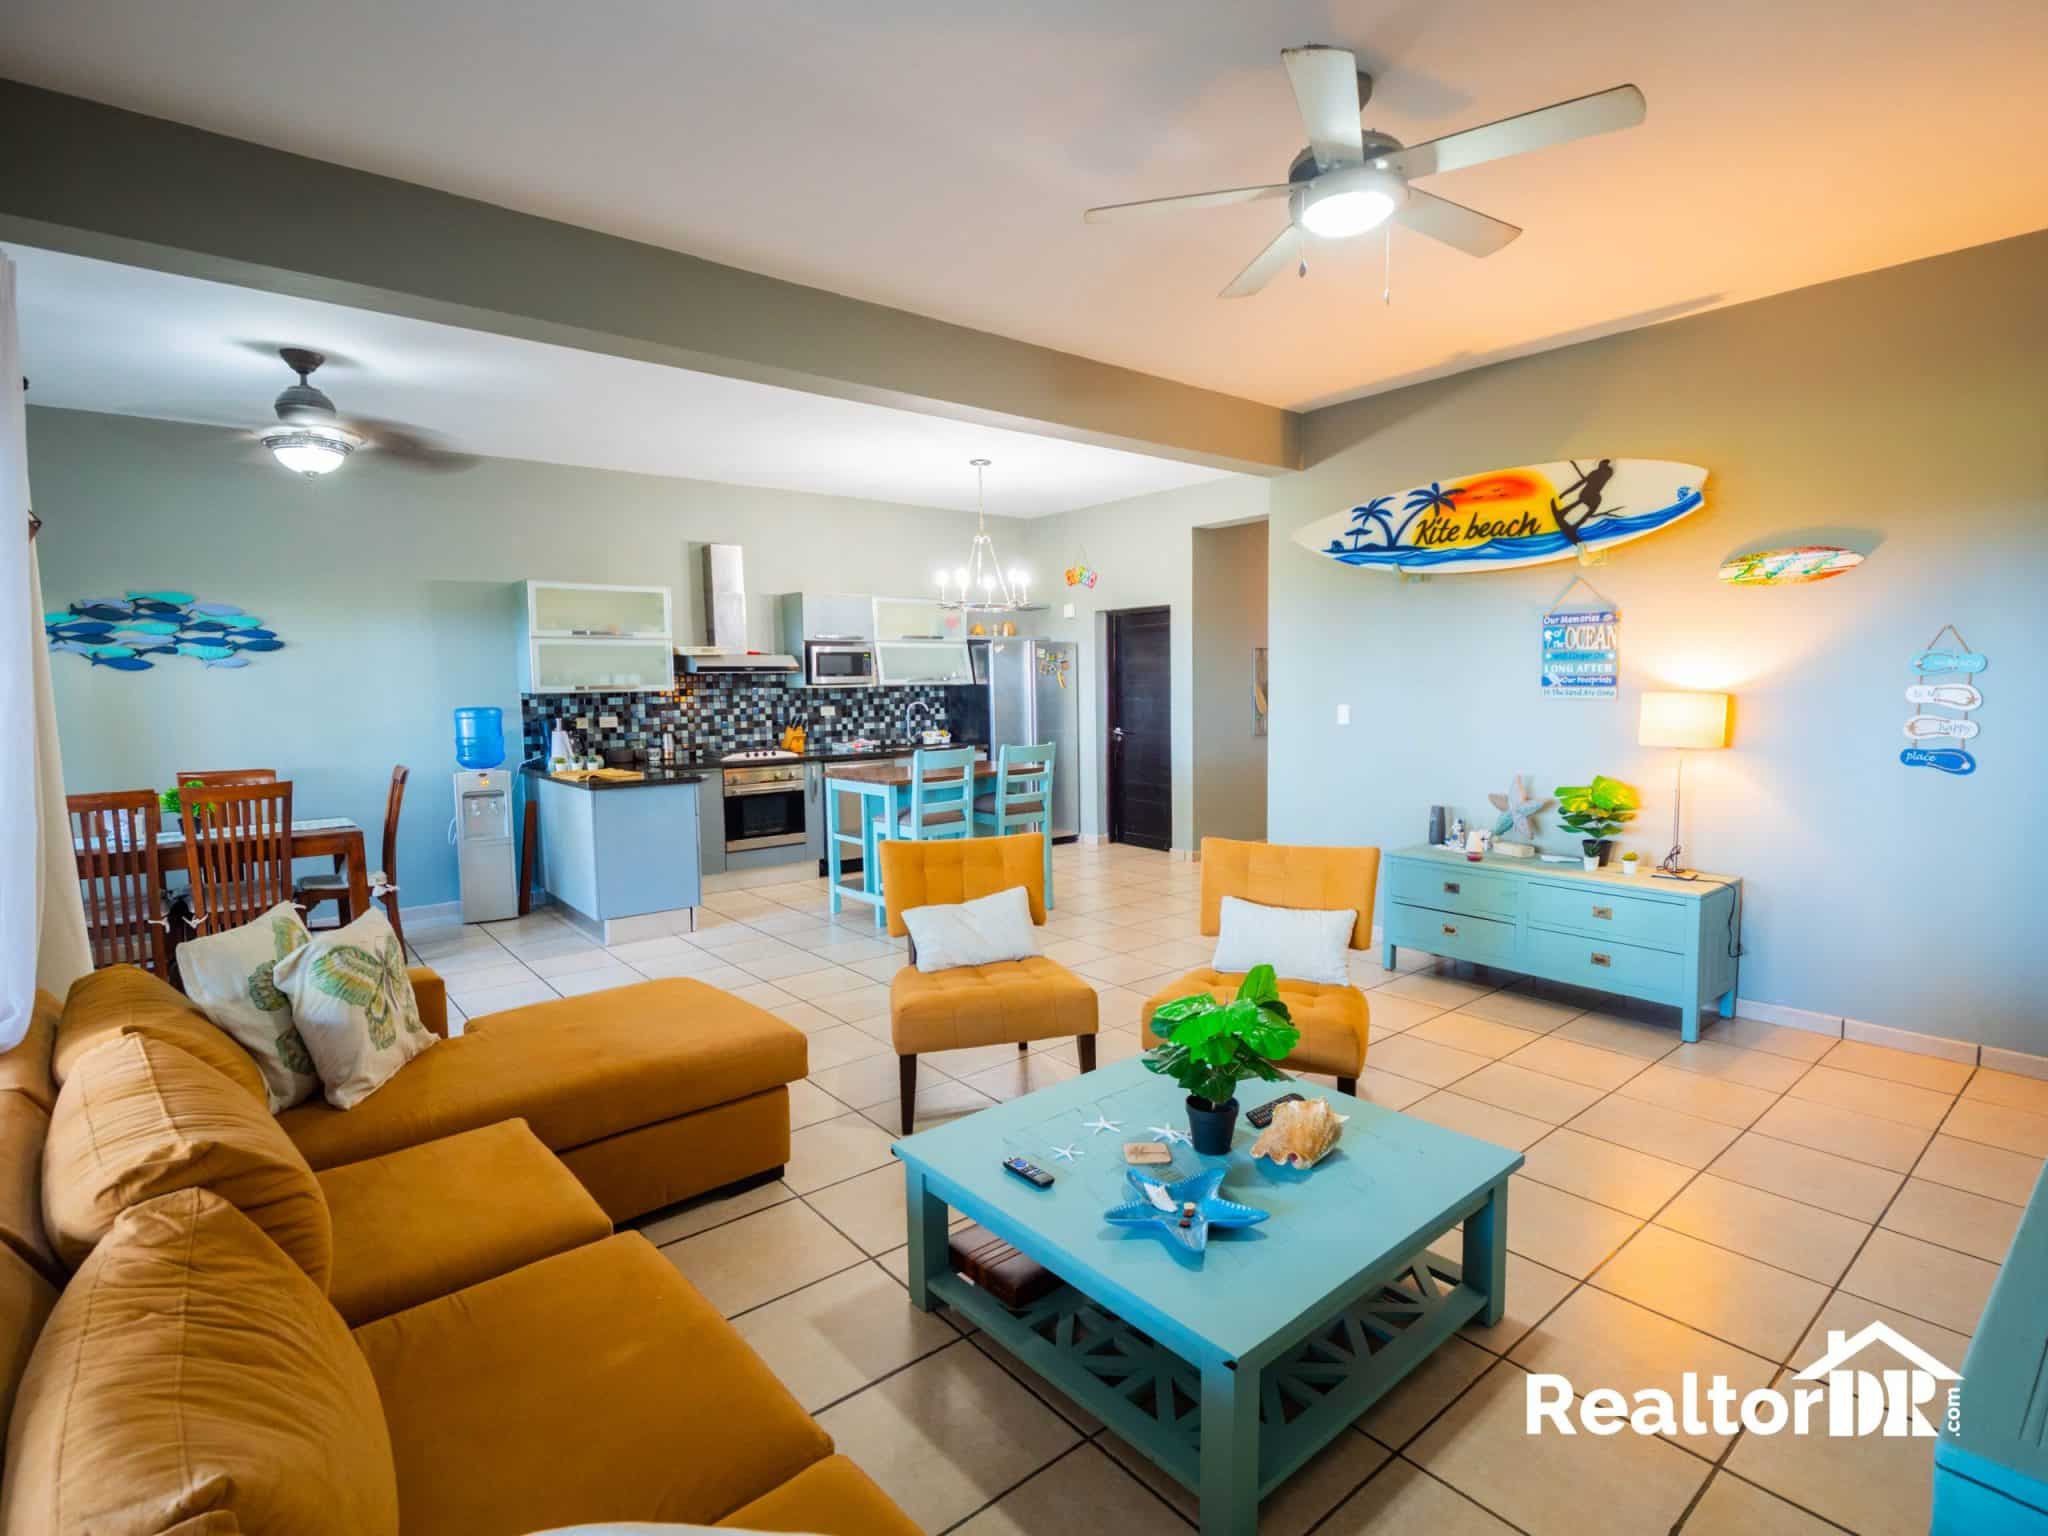 Enjoy Sunsets at This Fully Equipped 2 Bed Condo at The Beach